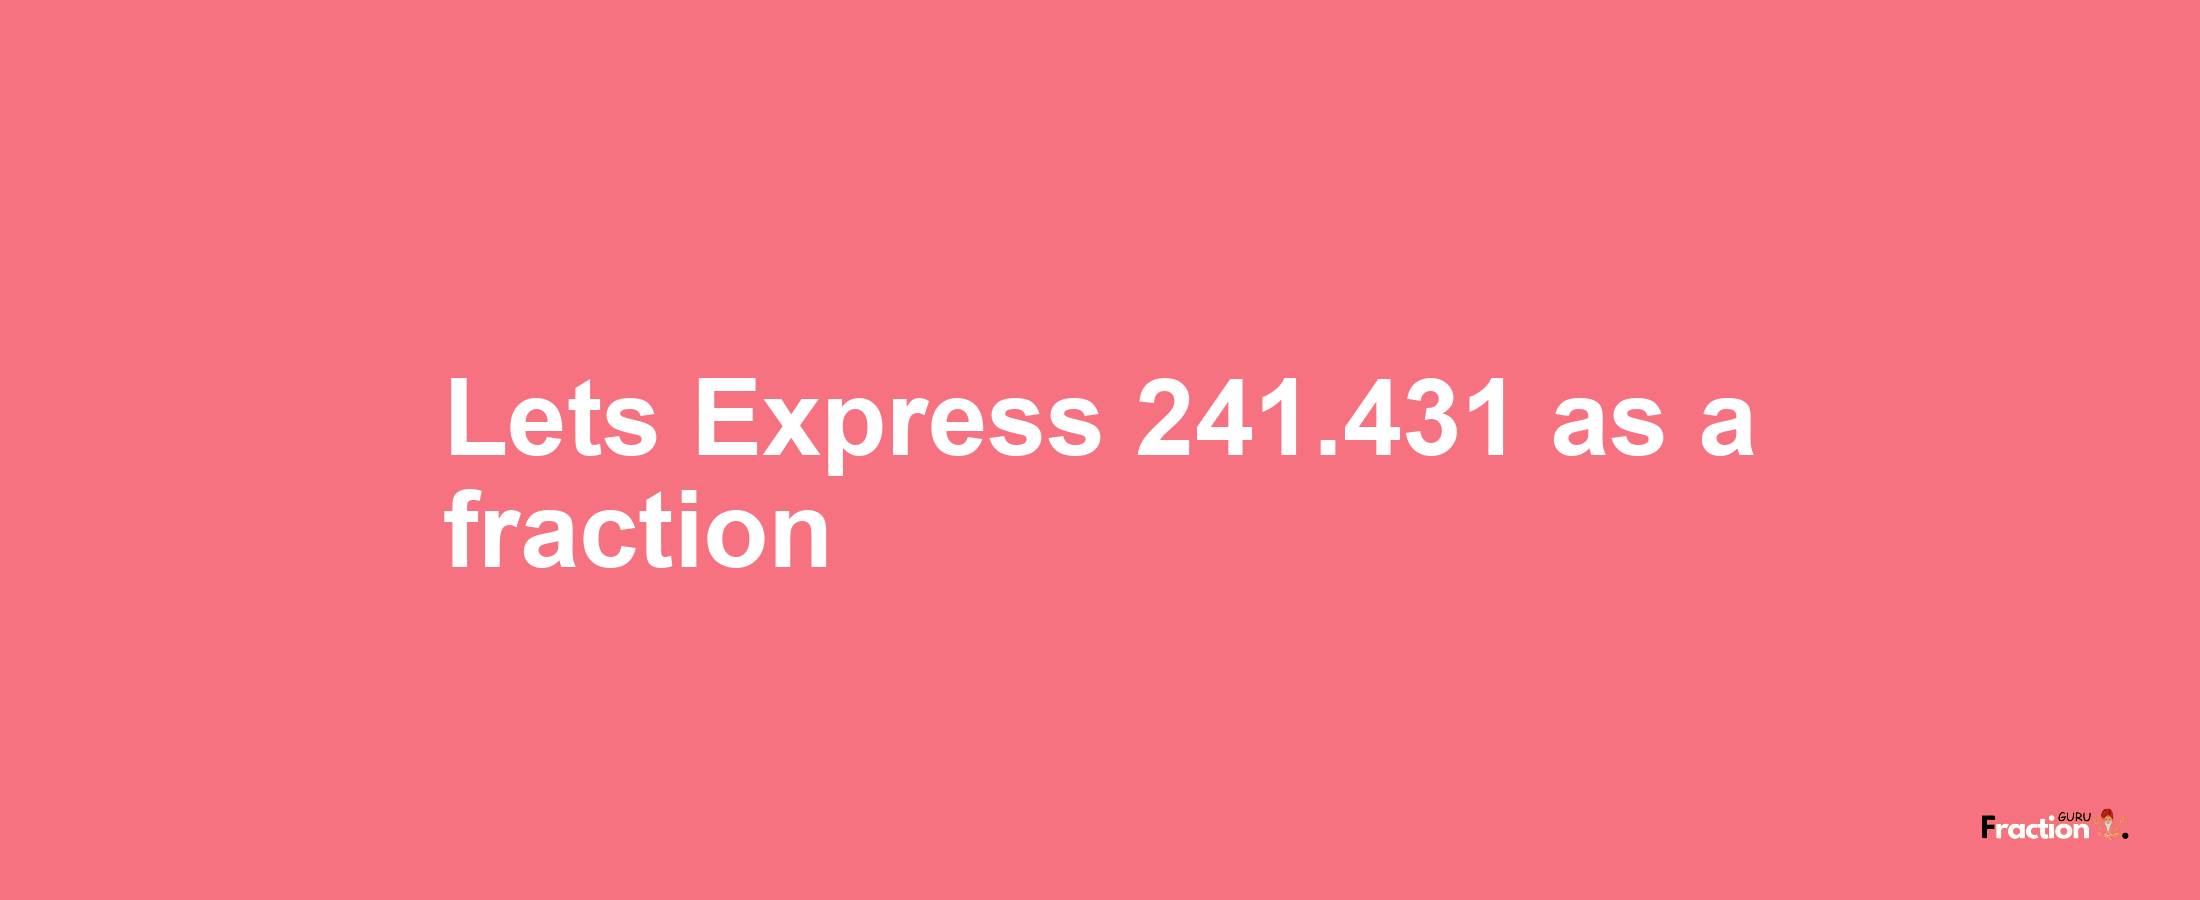 Lets Express 241.431 as afraction